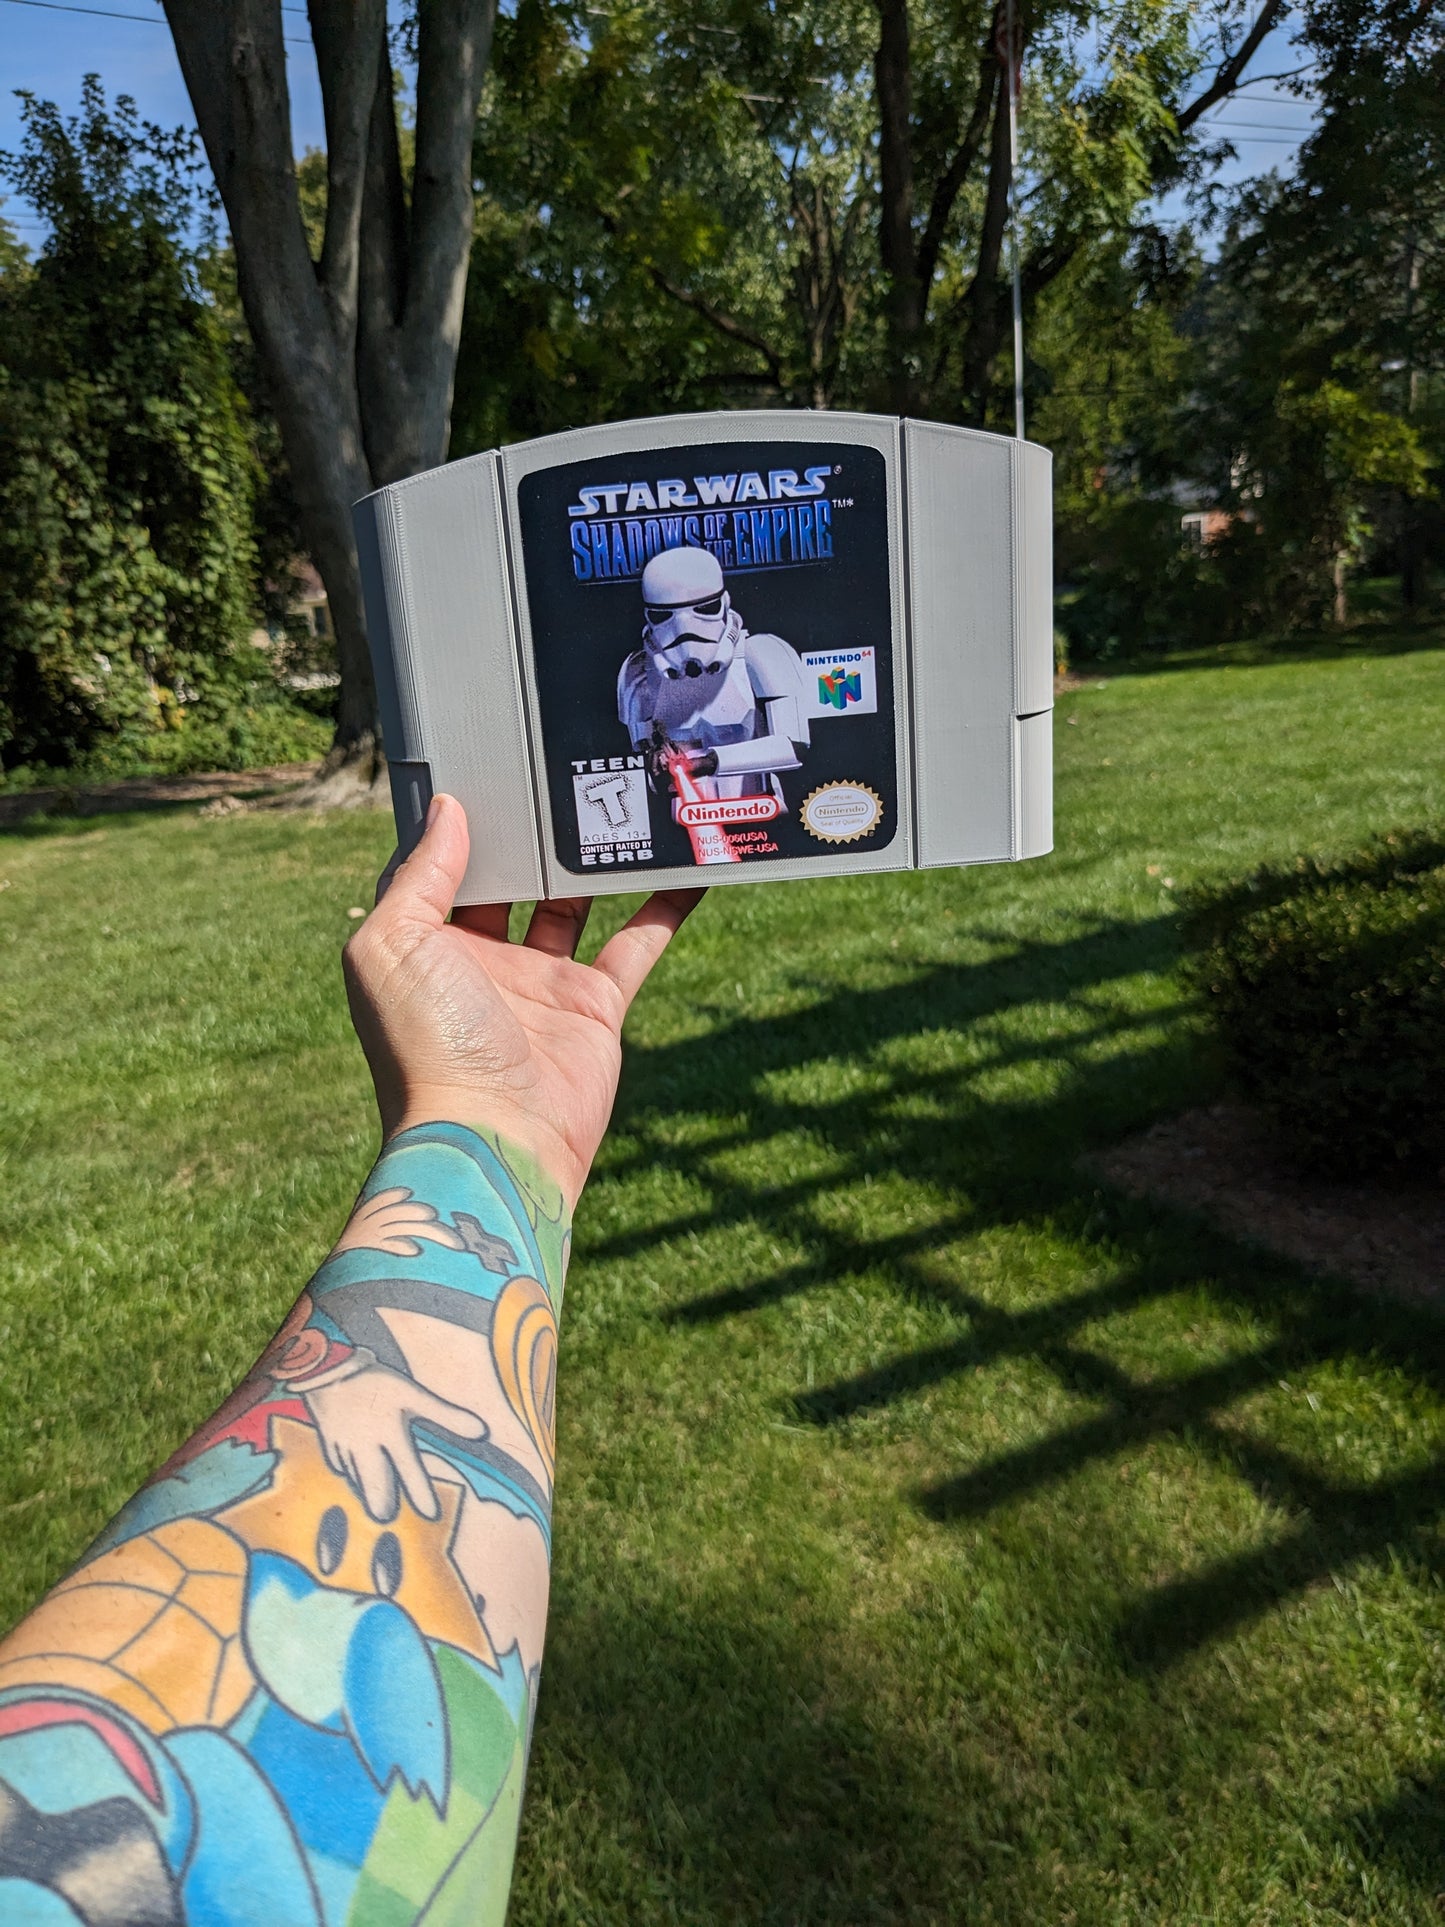 Star Wars Shadows of the Empire (N64)